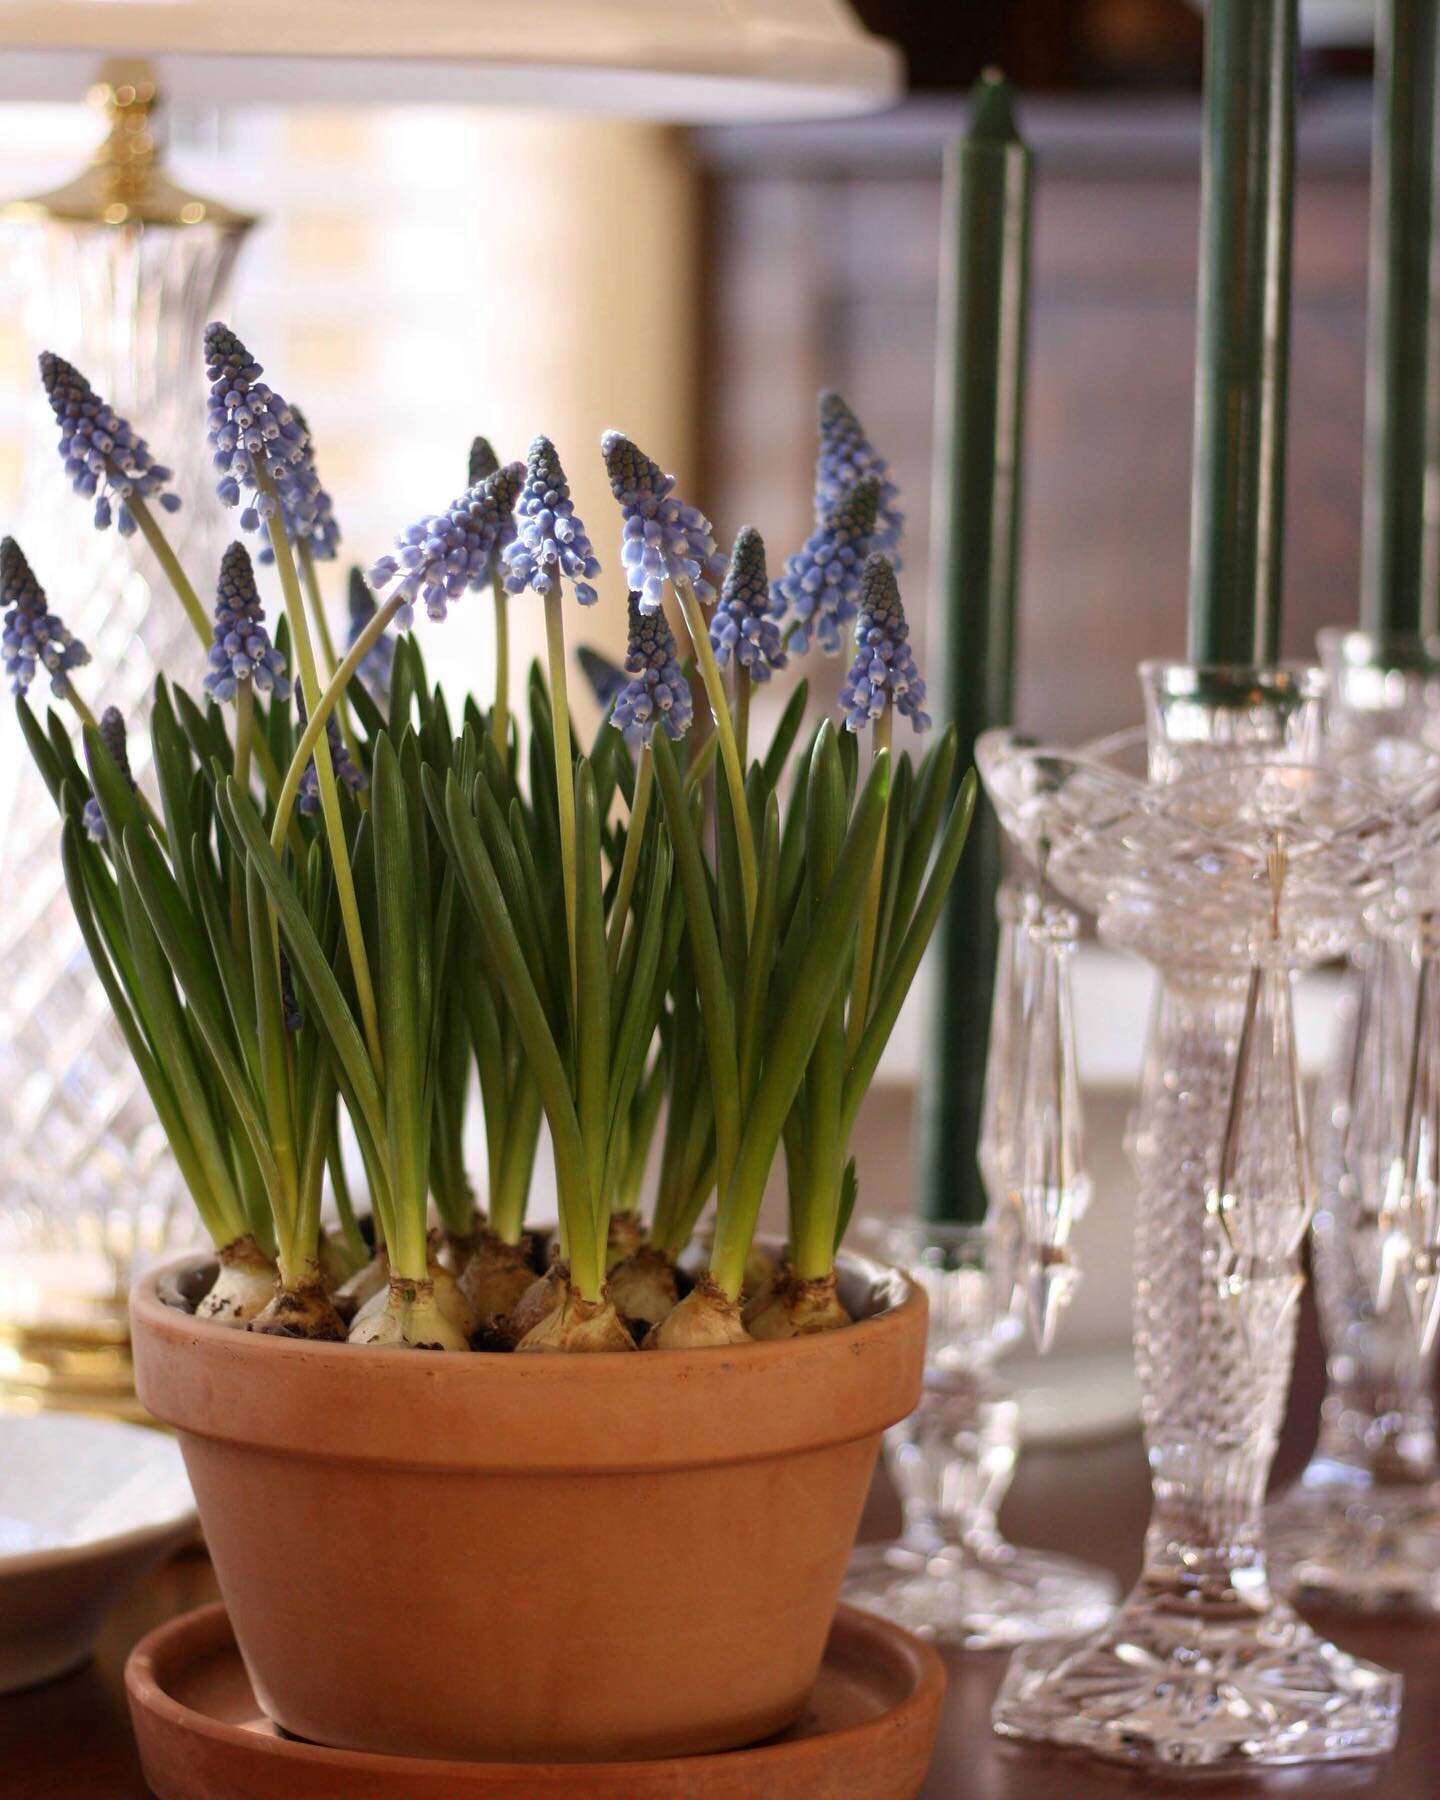 How to beat the winter blues (tip #16): Enjoy fresh flowers in the form of forced bulbs like daffodils, tulips, hyacinths and these muscari (grape hyacinths) here. You can either chill them yourself outside or purchase them pre-potted and chilled - k